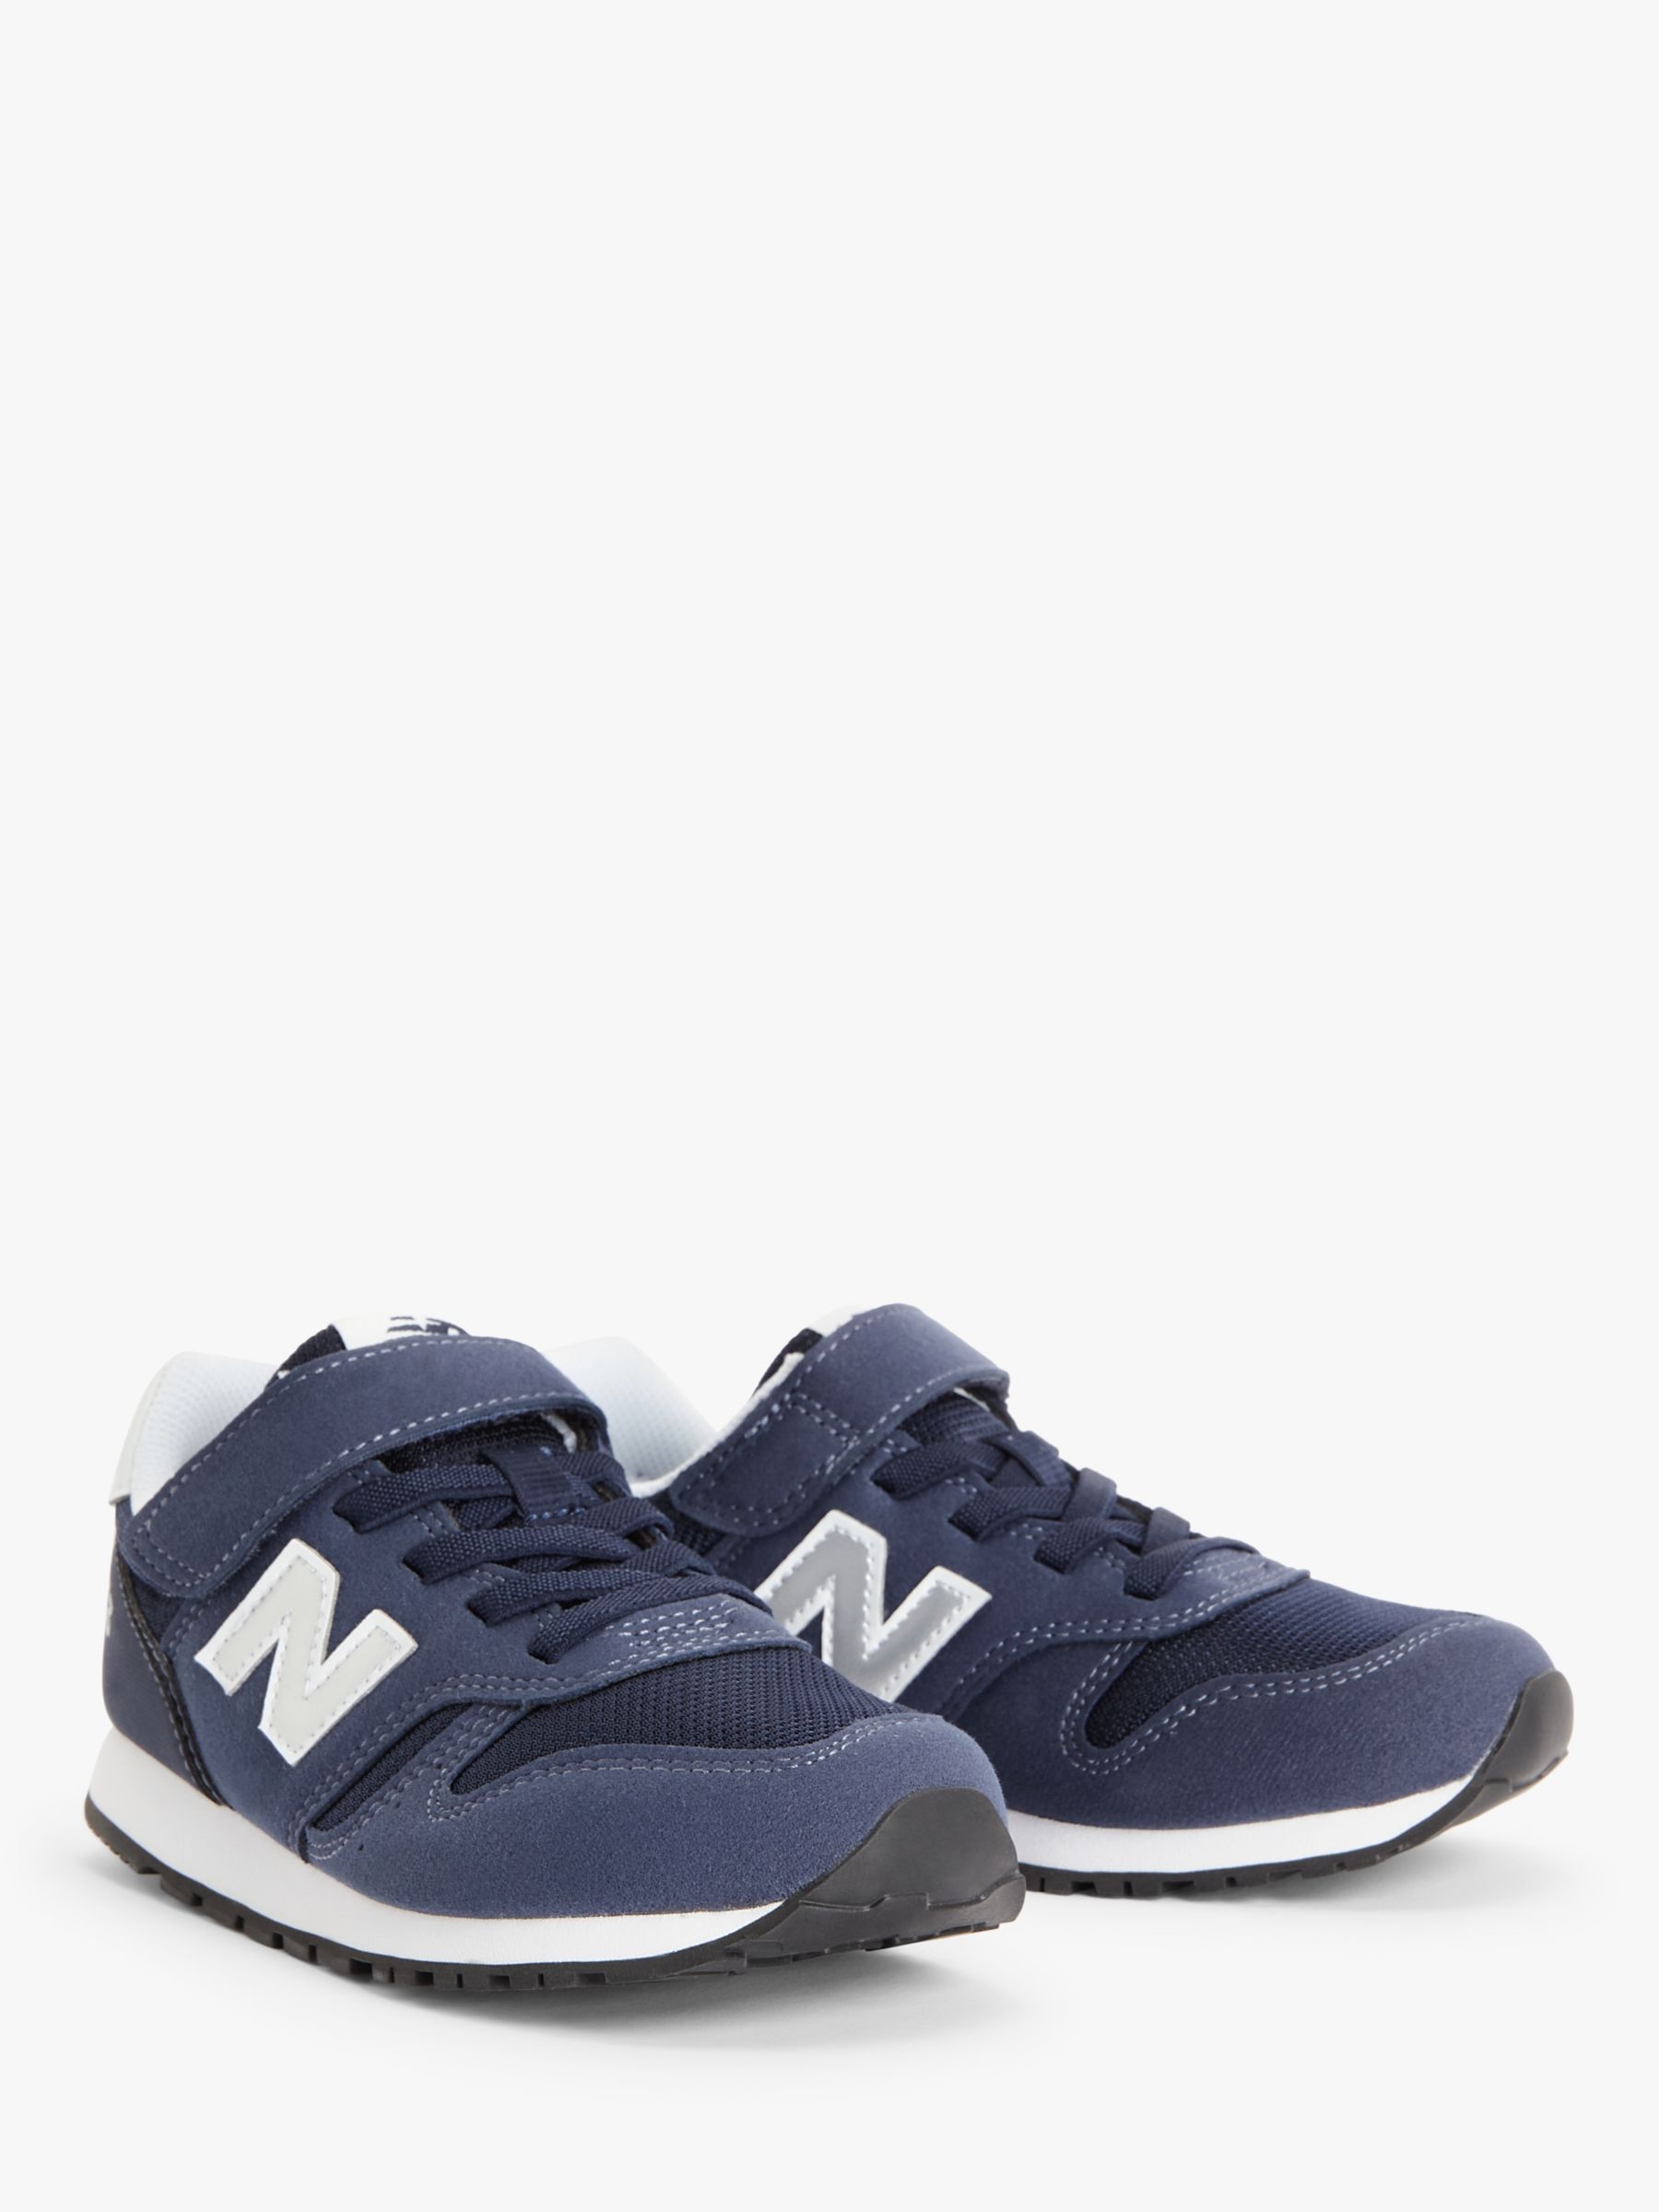 New Balance Kids' 373 Bungee Lace with Velcro Top Strap Trainers, Natural Indigo, 12 Jnr